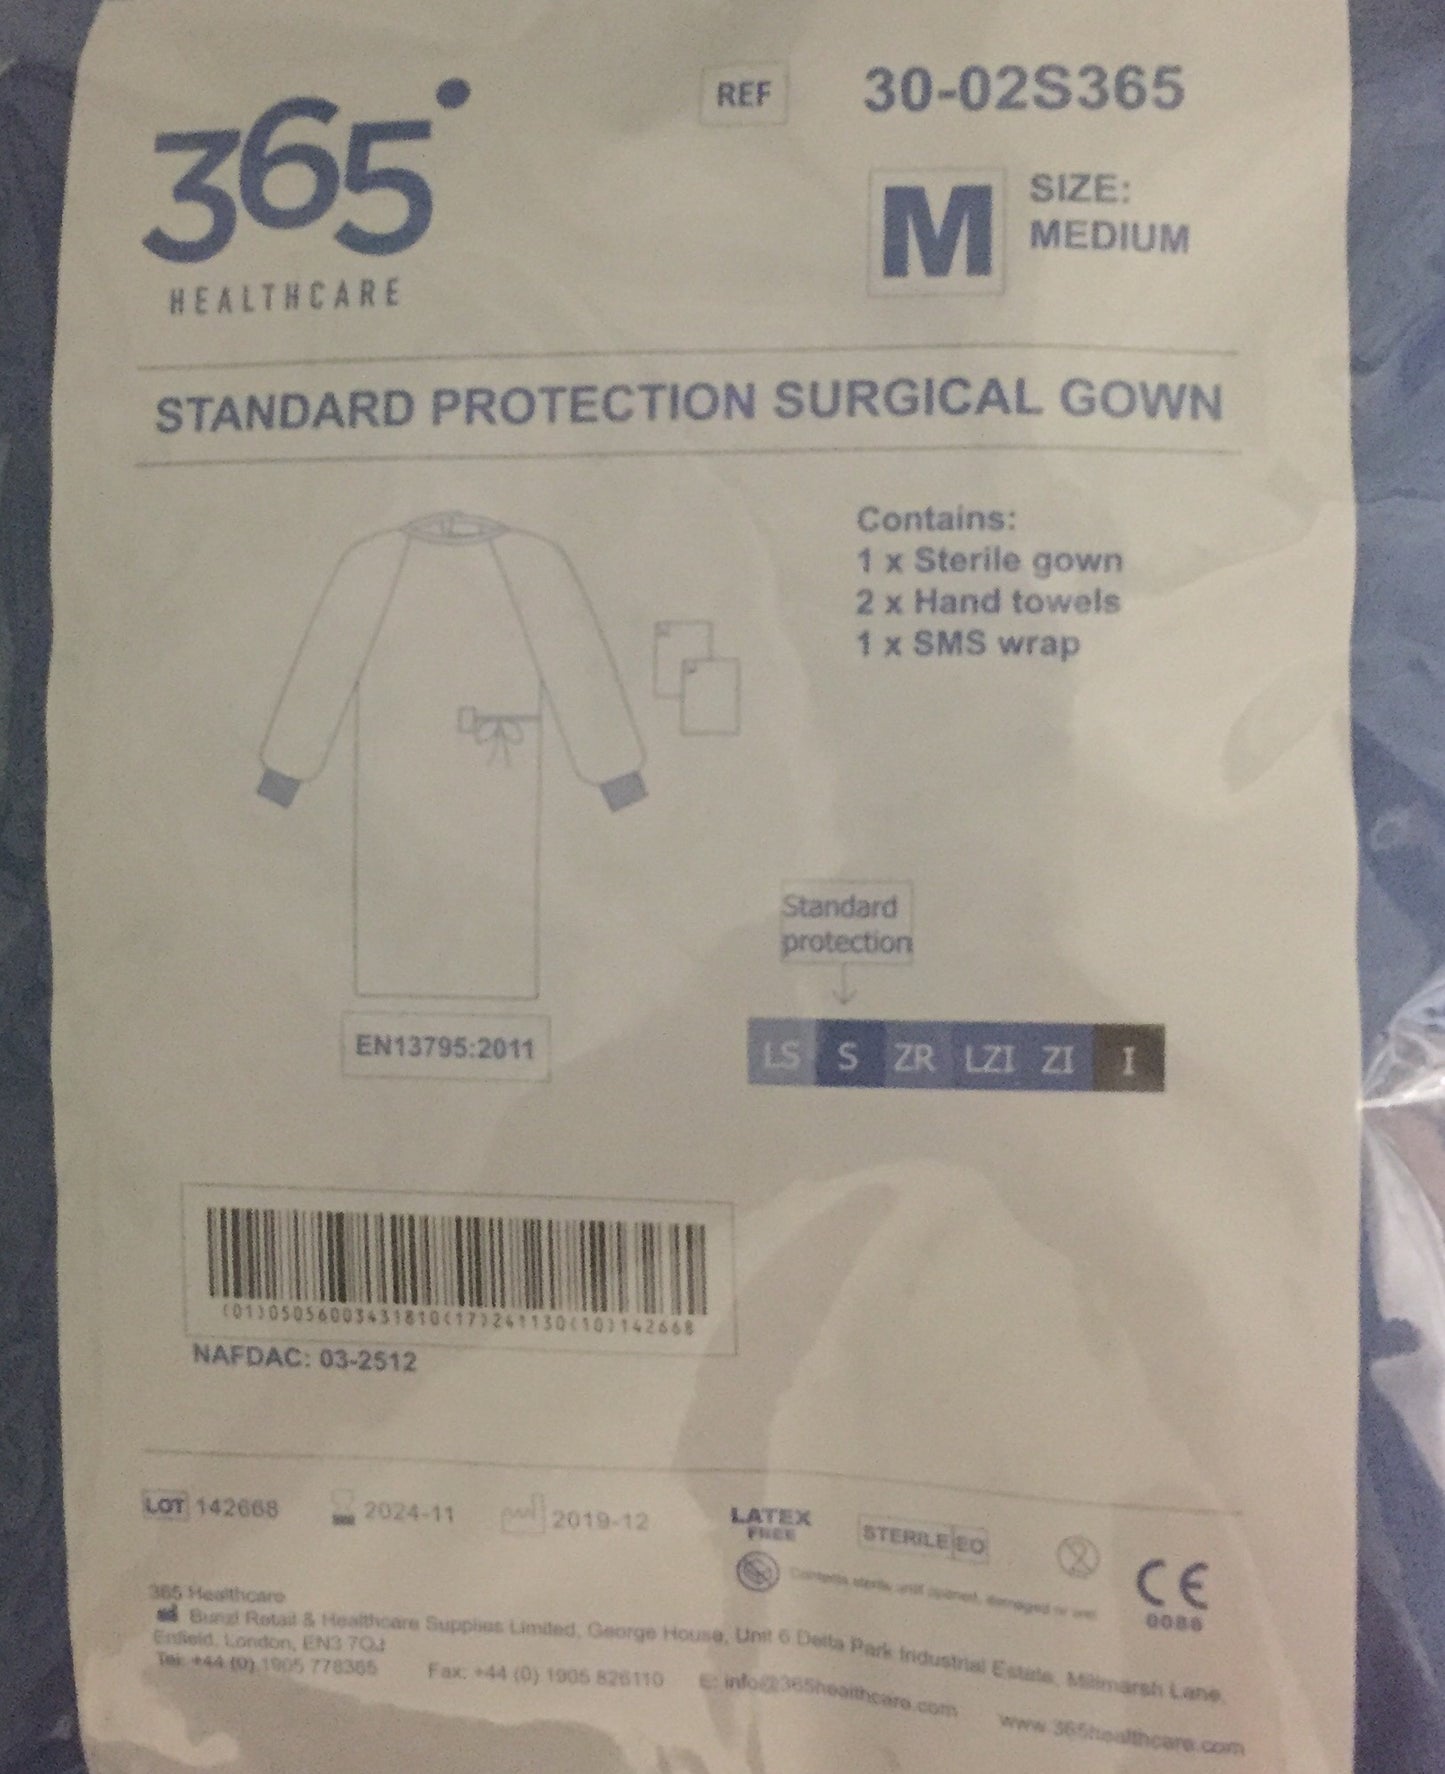 Protective Gown Surgical Surgeons and Surgery Gowns,  sterile, medium size, renowned 365 quality brand used throughout nhs, sealed pack 1 gown each